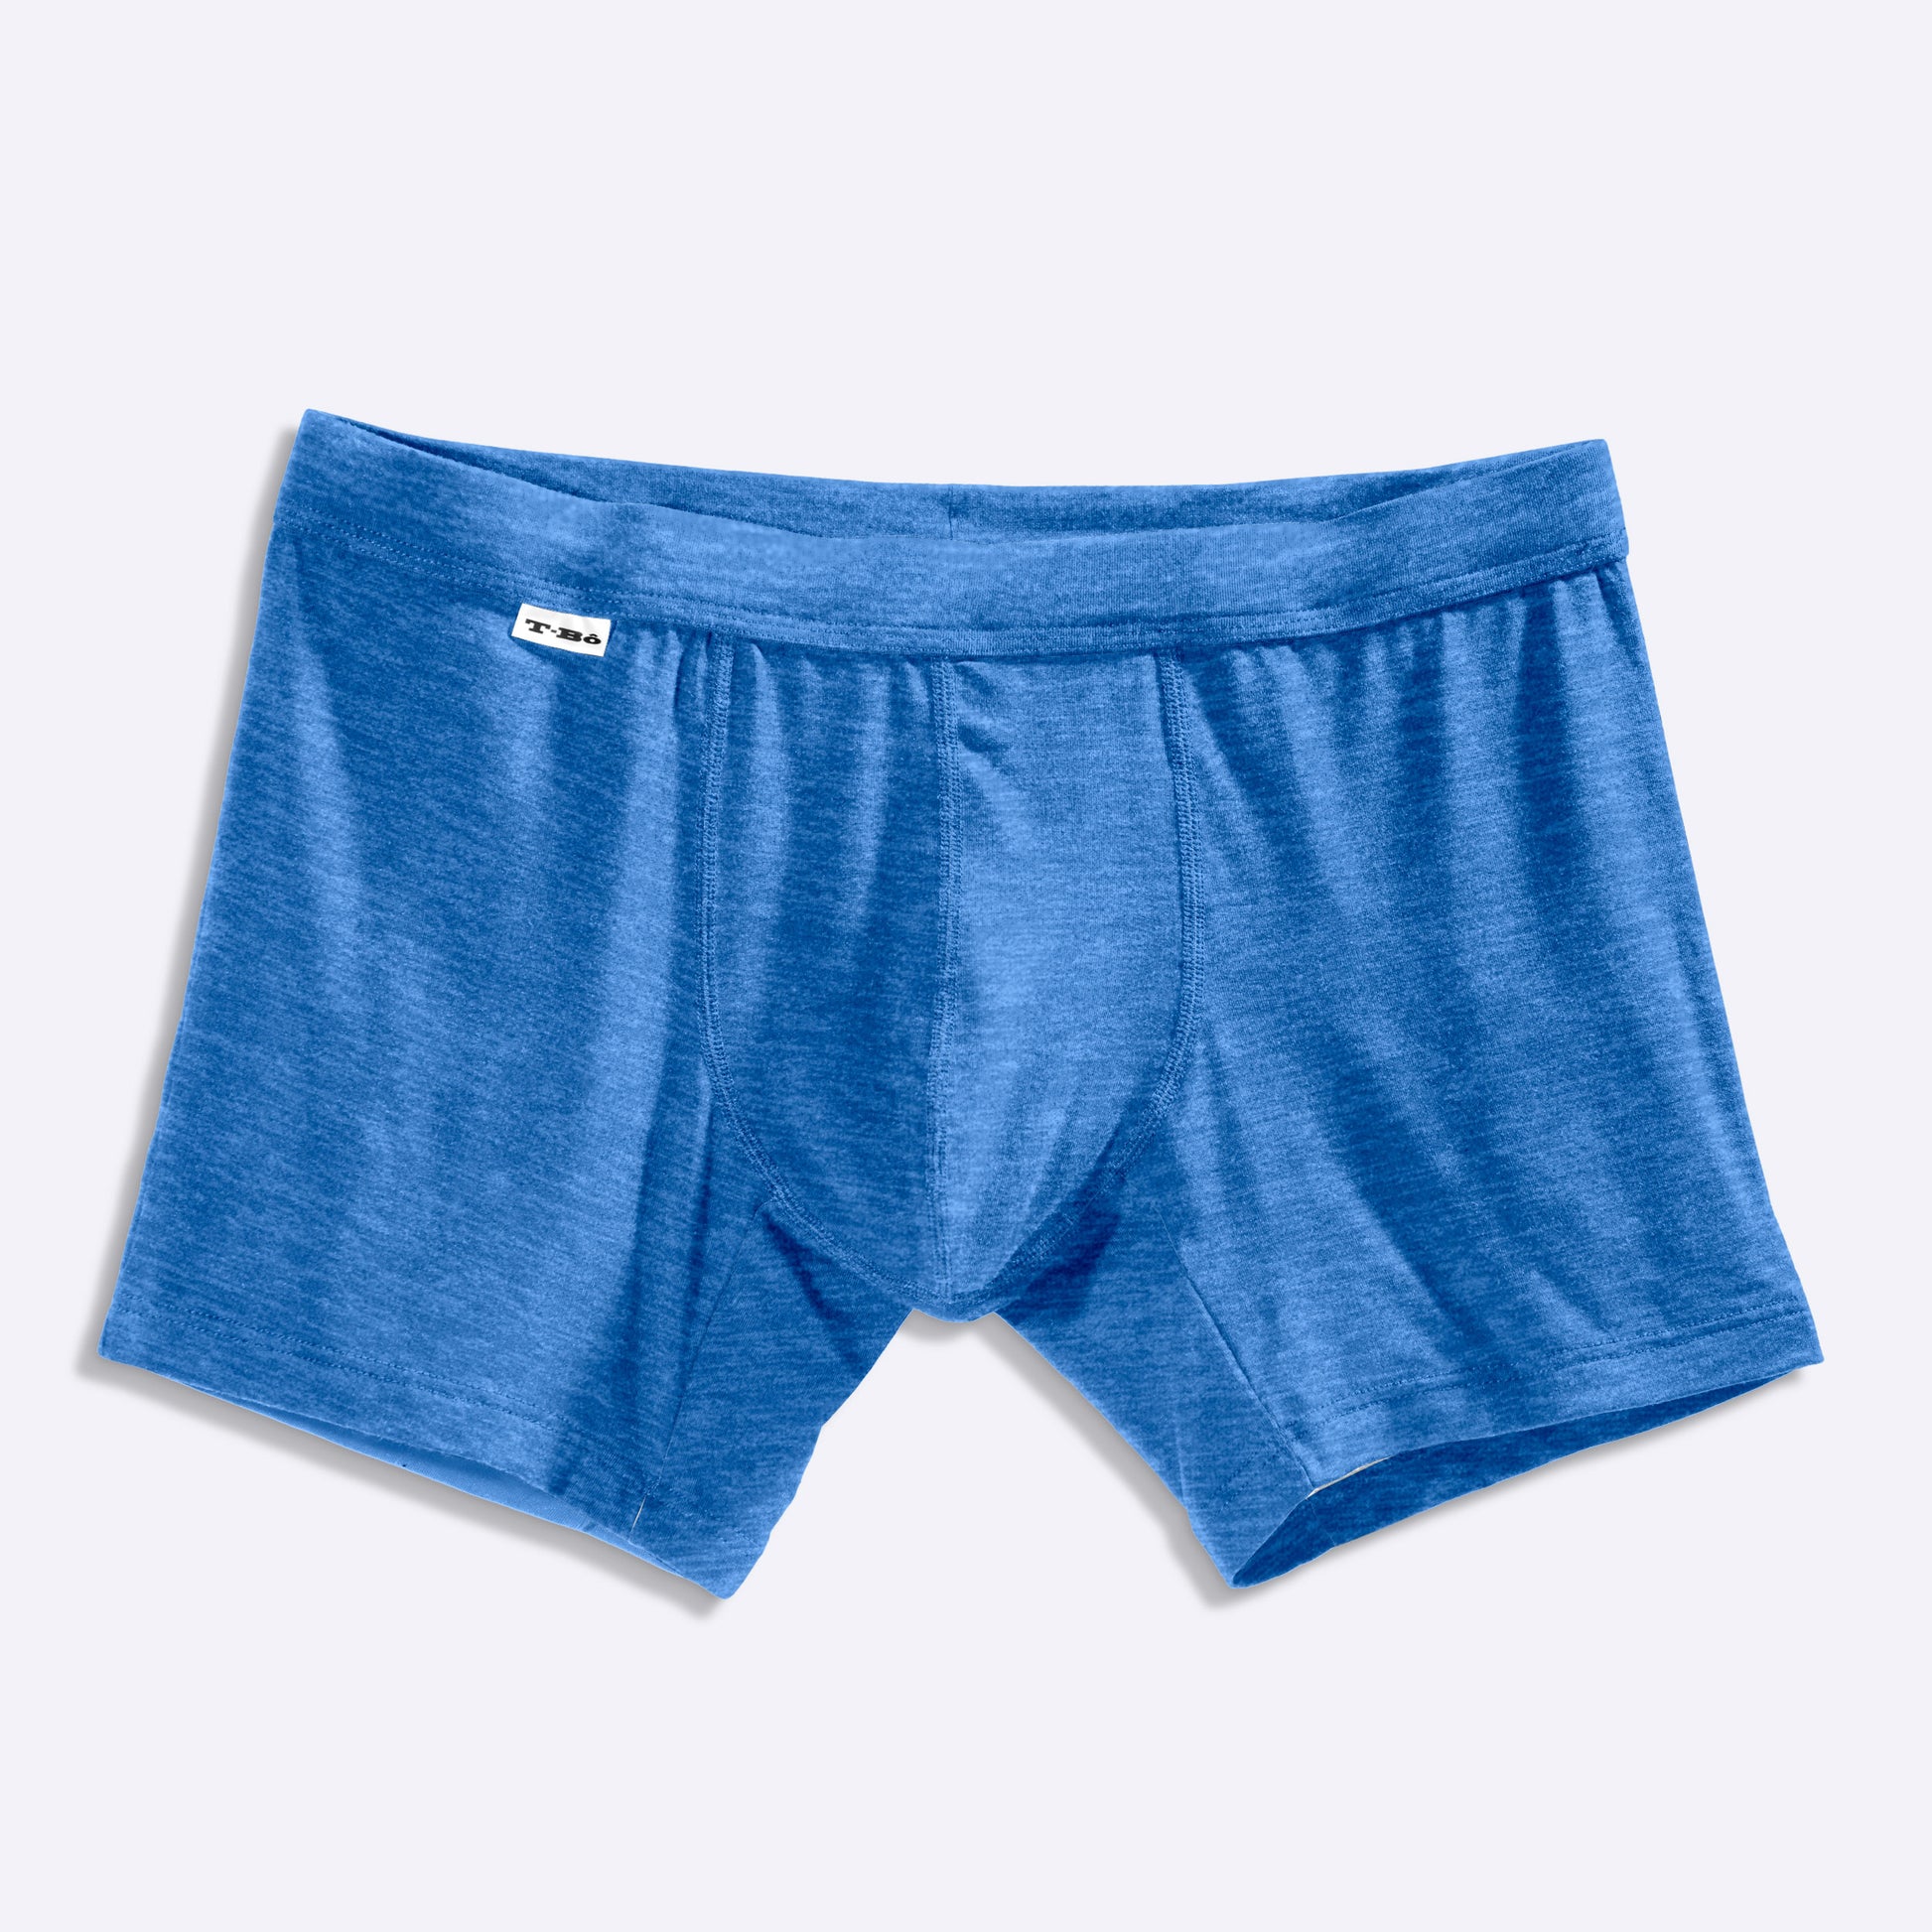 The Limited Edition Laptis Blue Boxer Brief for men in the USA and Canada